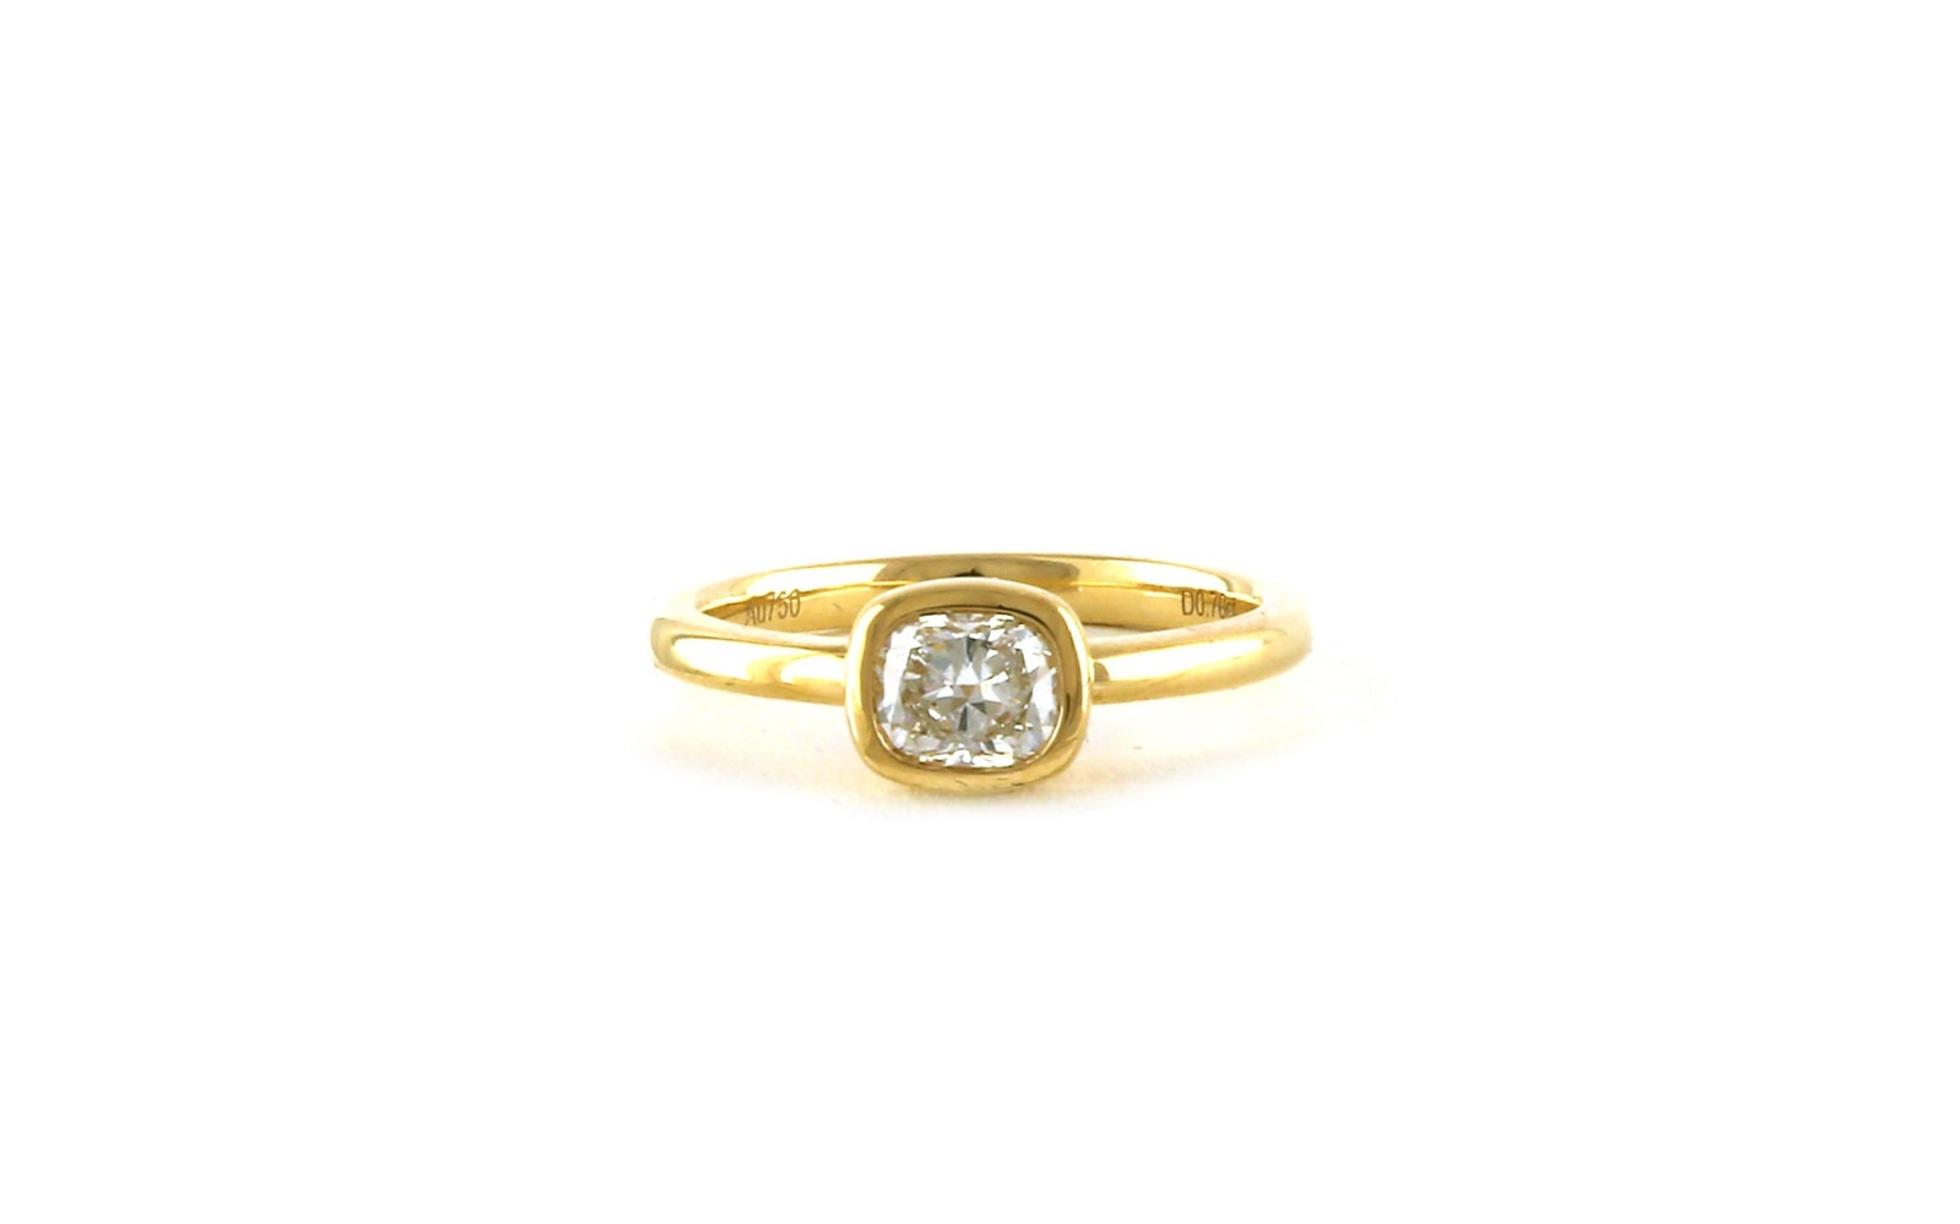 East-West Bezel-set Cushion-cut Diamond Engagement Ring in Yellow Gold (0.70cts)